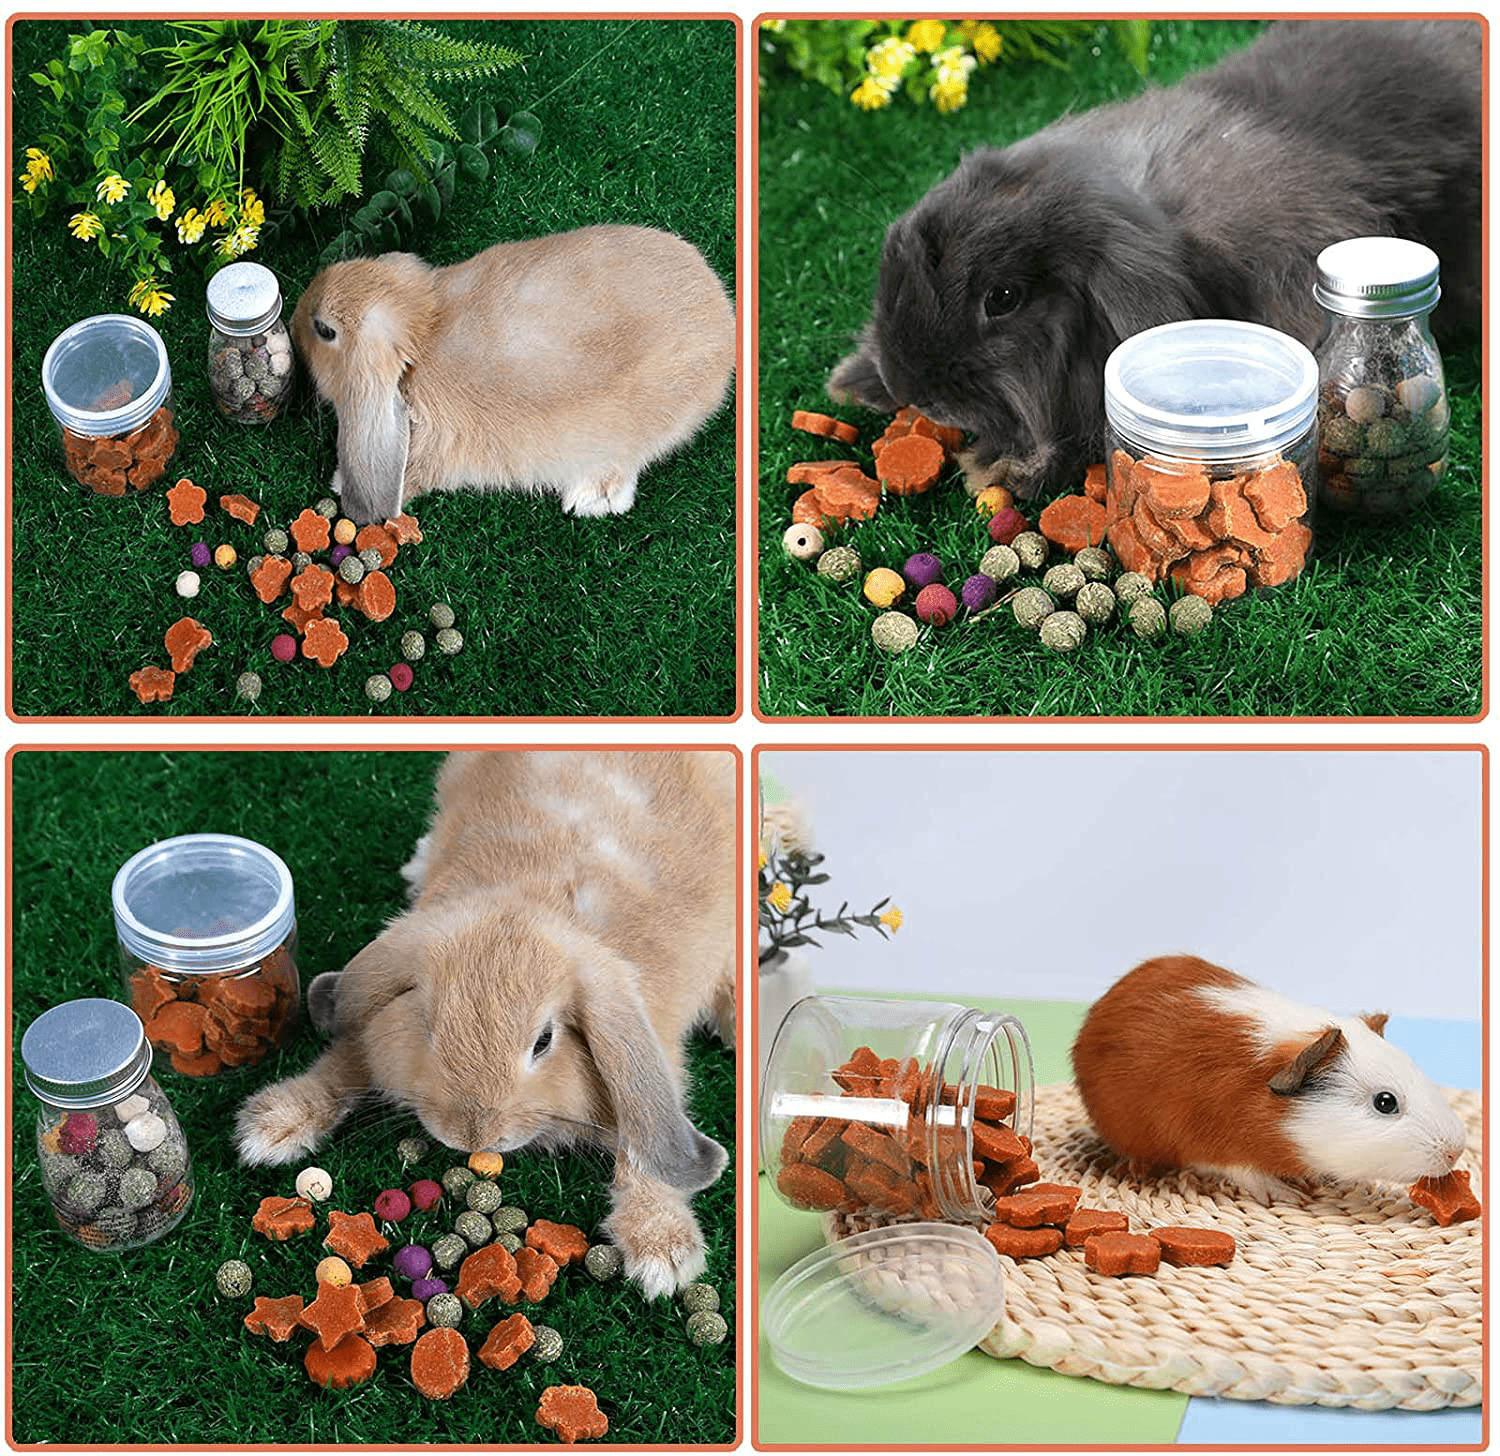 X-Pet Rabbit Chew Toys, Guinea Pig Treats 100% Natural Material Garden Stuff Flavored Biscuit&Grass Cake, Small Animals Teeth Grinding Chewing Suitable for Bunny Hamster Chinchilla Dwarf Gerbils Animals & Pet Supplies > Pet Supplies > Small Animal Supplies > Small Animal Food X-pet   